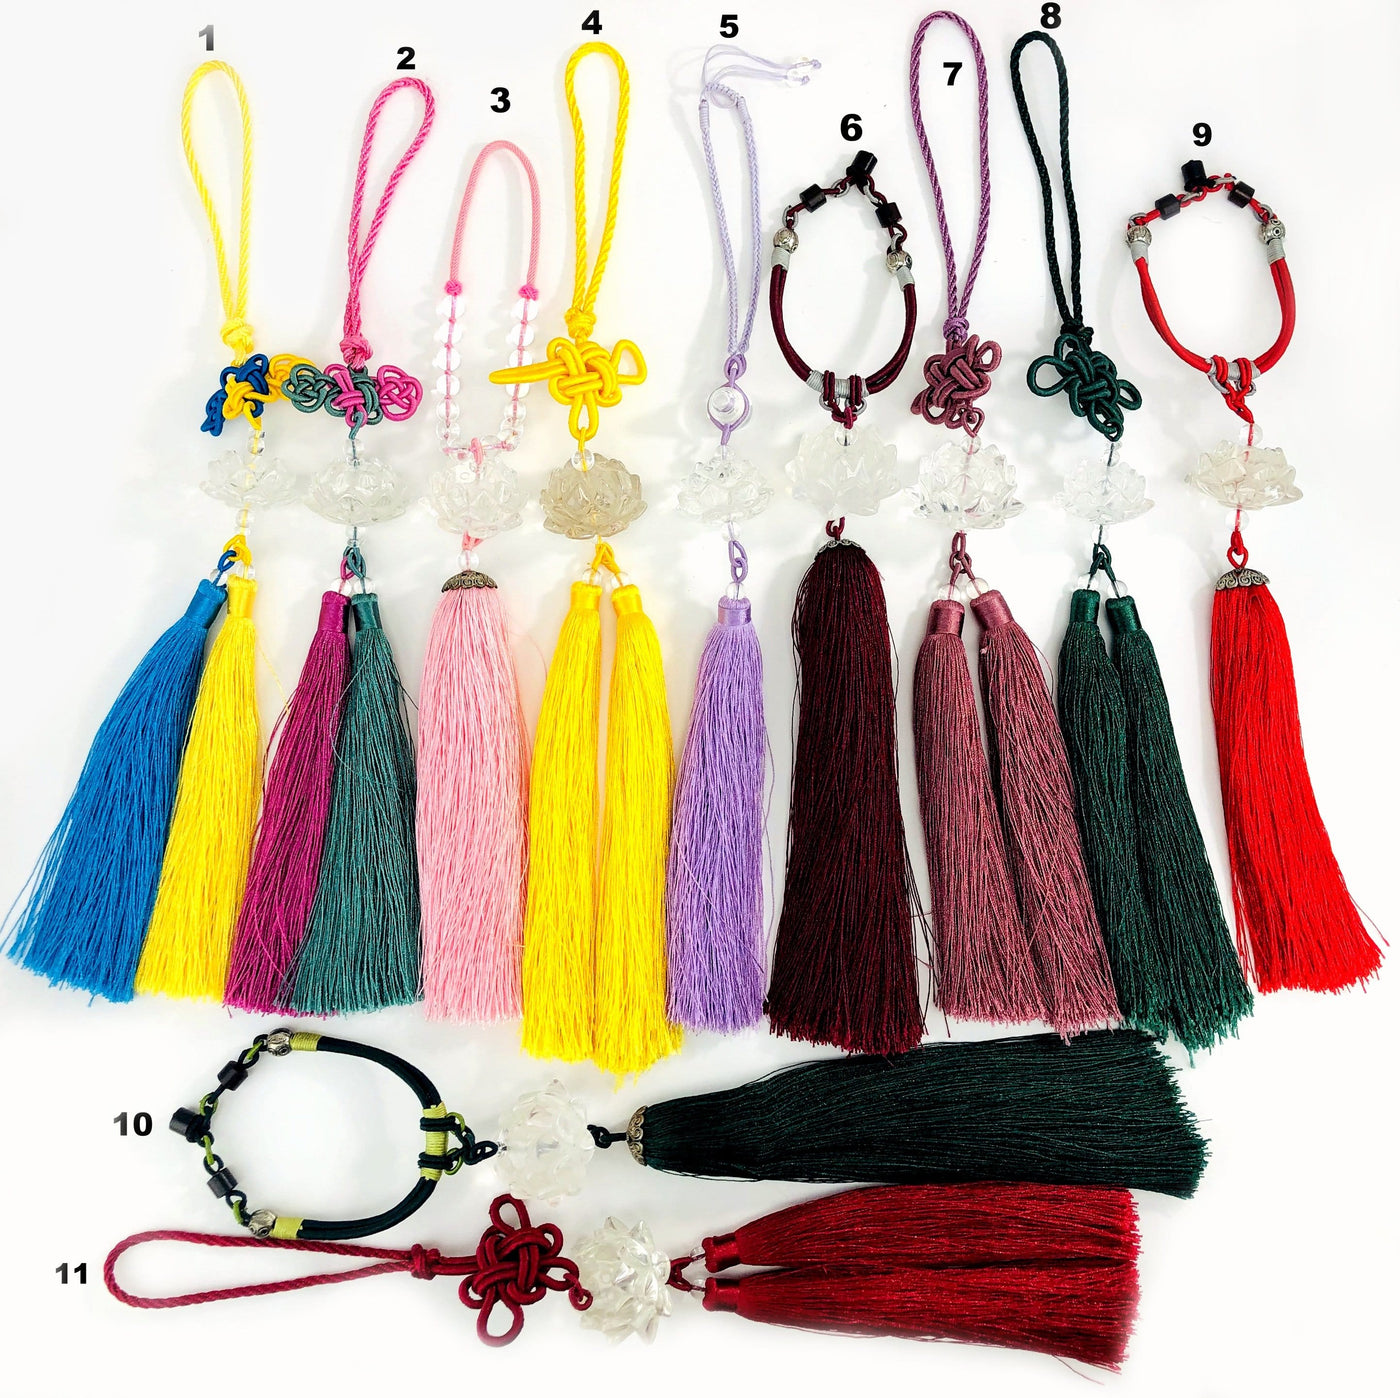 11 different colored Lotus Flower Colored Tassels on white background